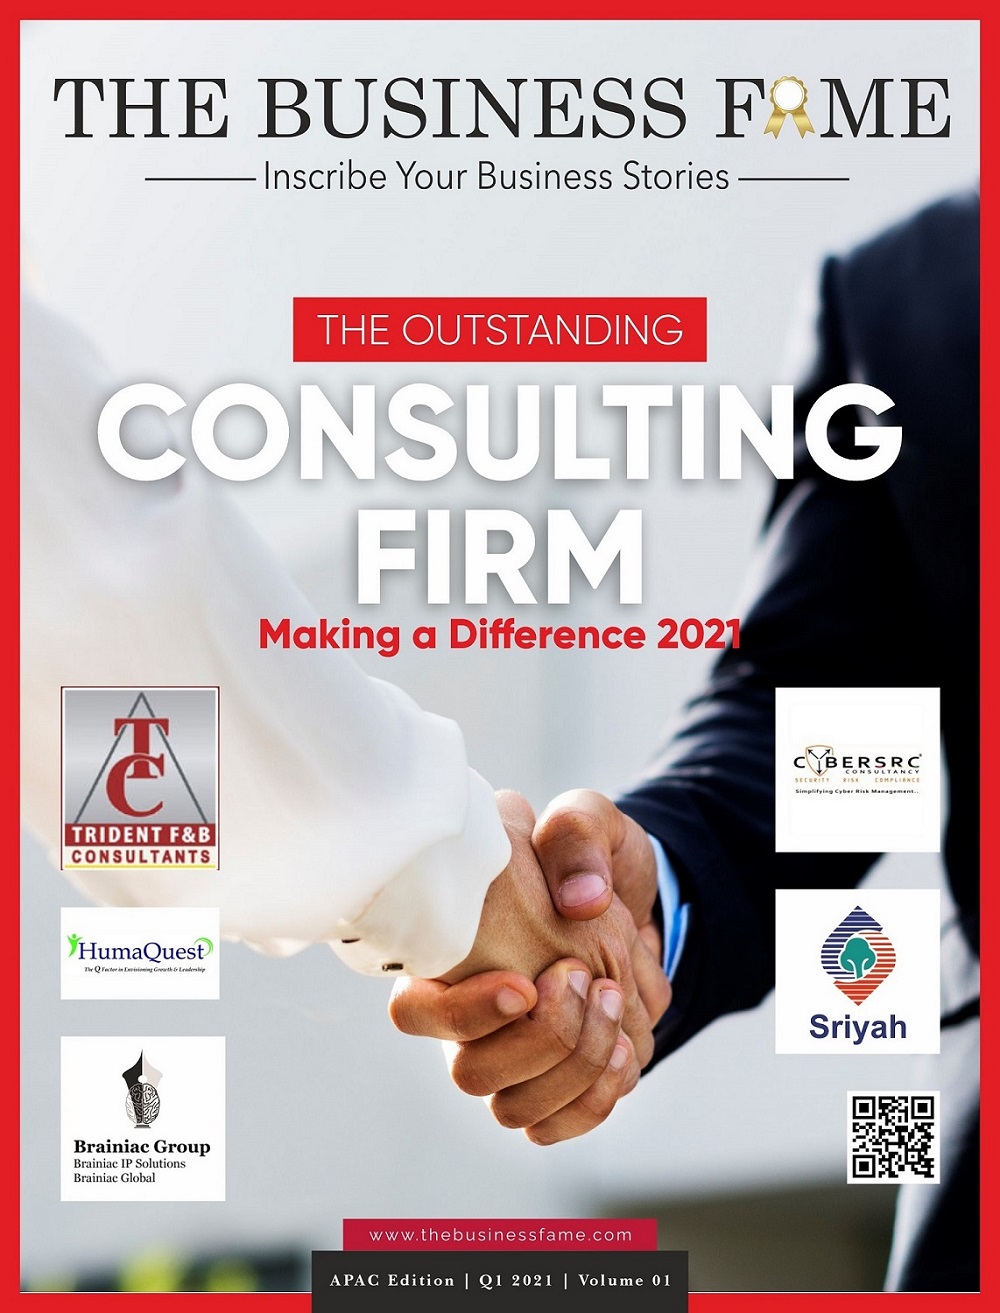 The Outstanding Consulting Firm Making a Difference 2021